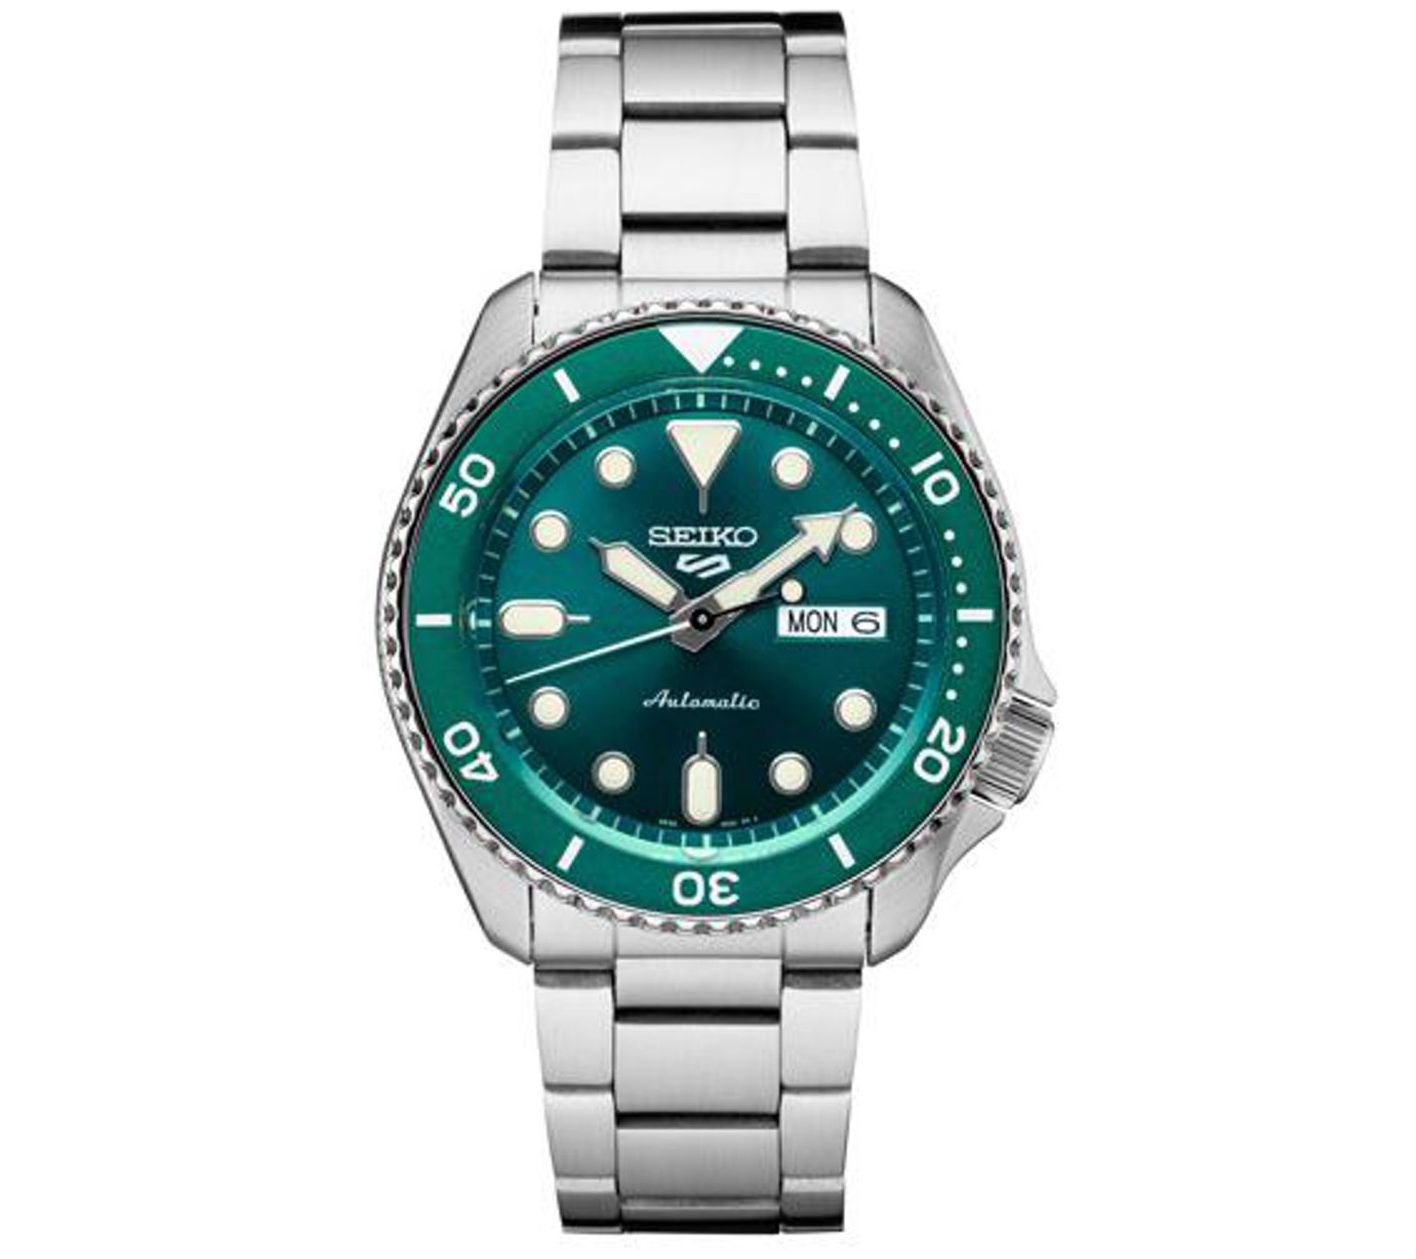 Seiko Men's Stainless Steel Teal Dial Watch - QVC.com